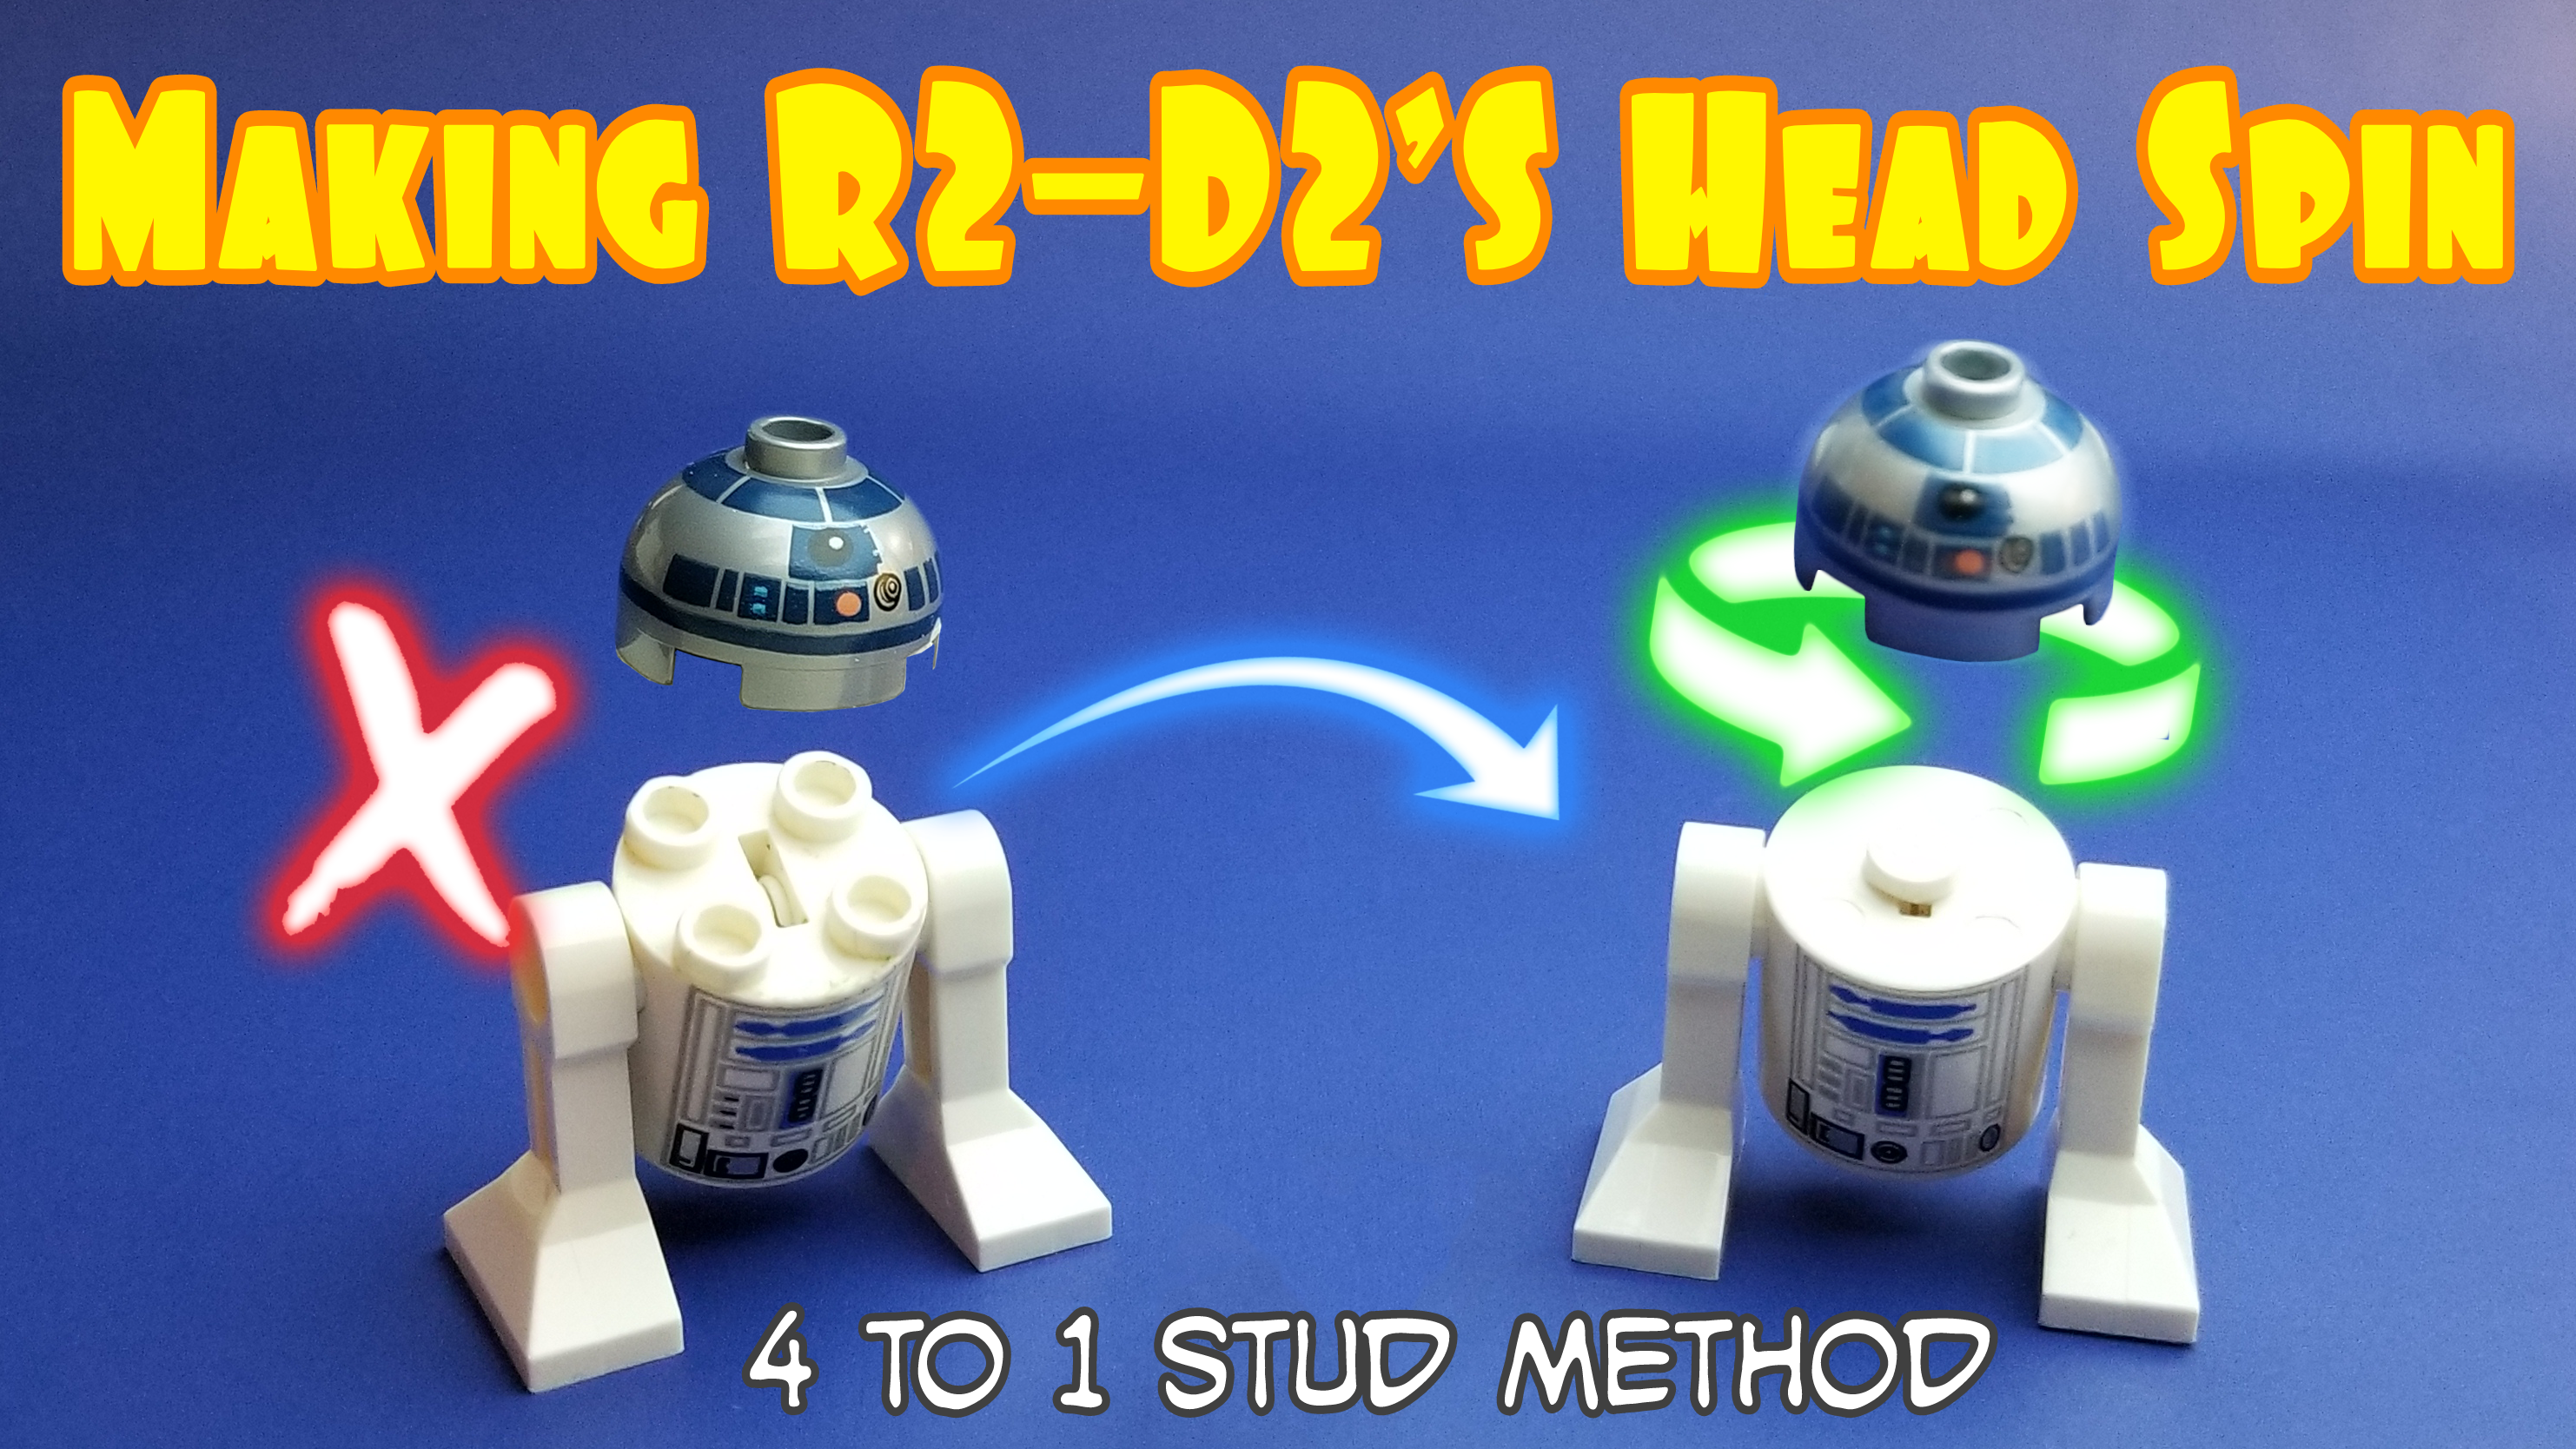 How to get Lego R2D2’s head to spin